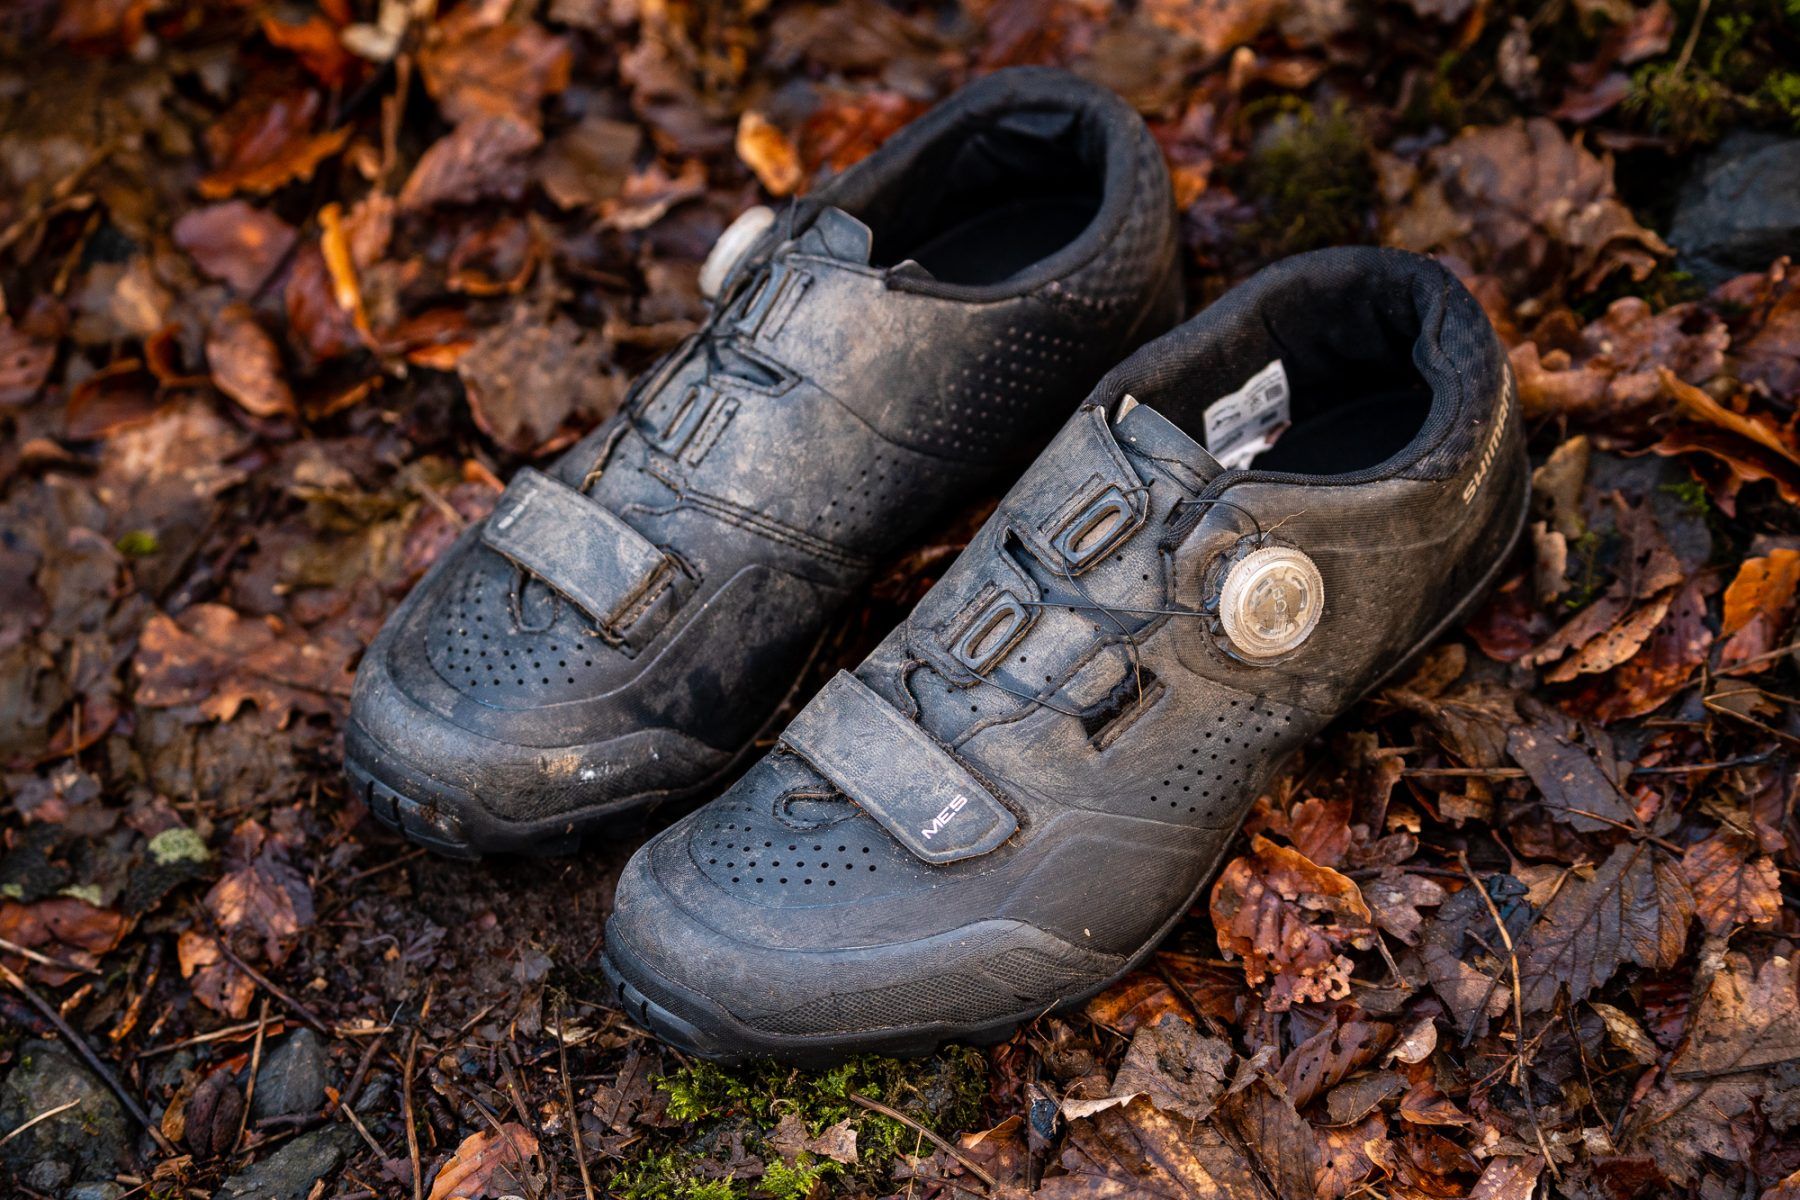 Shimano ME502 Review - An all round trail riding shoe?